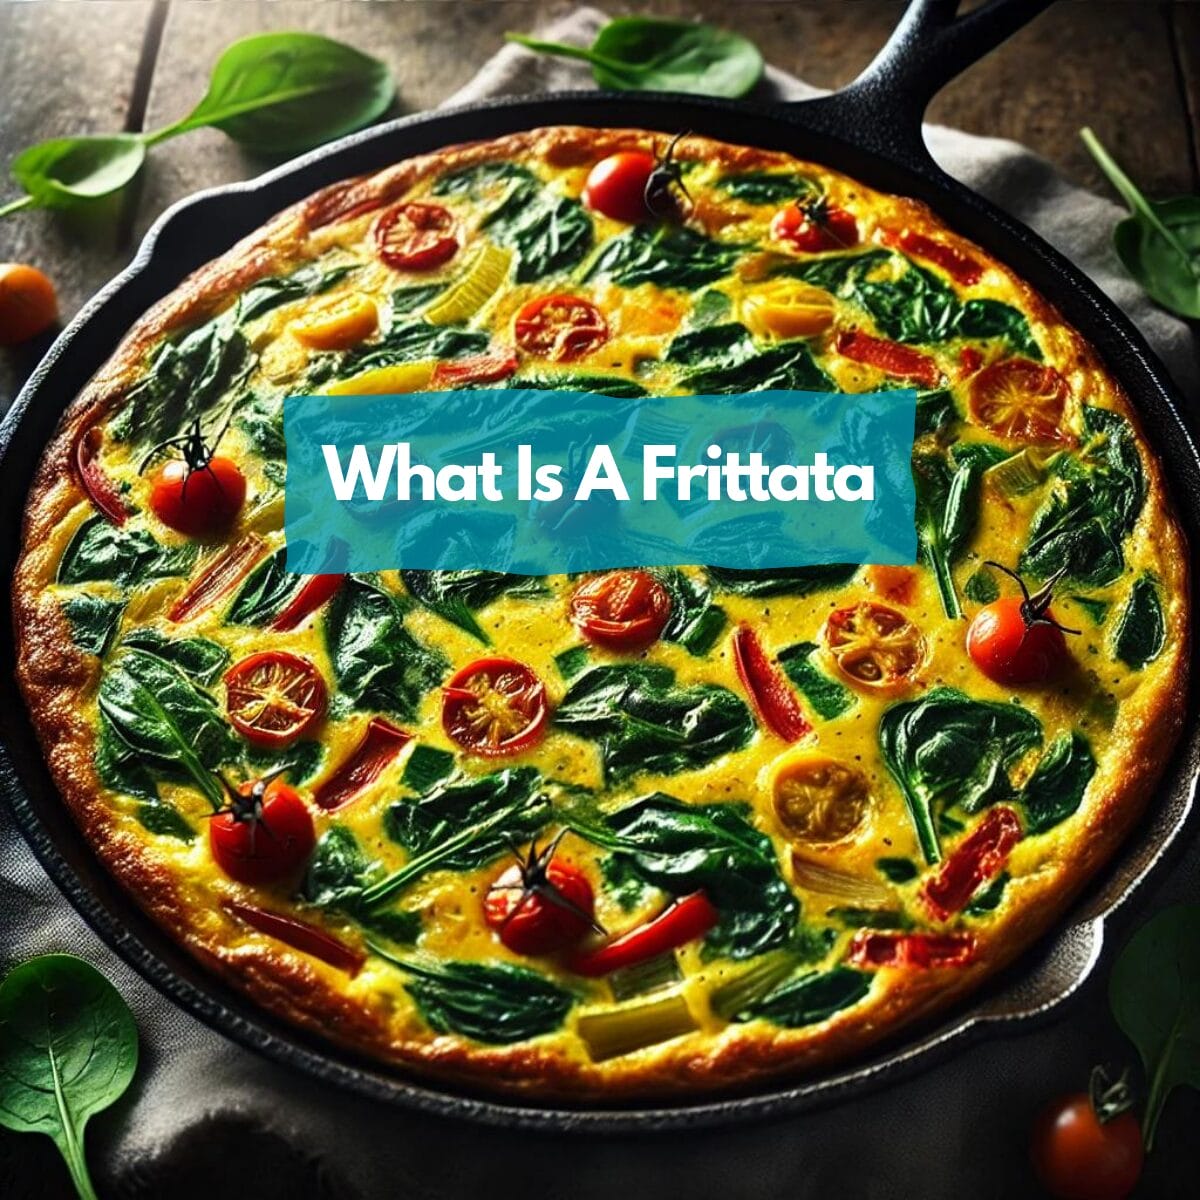 What Is a Frittata